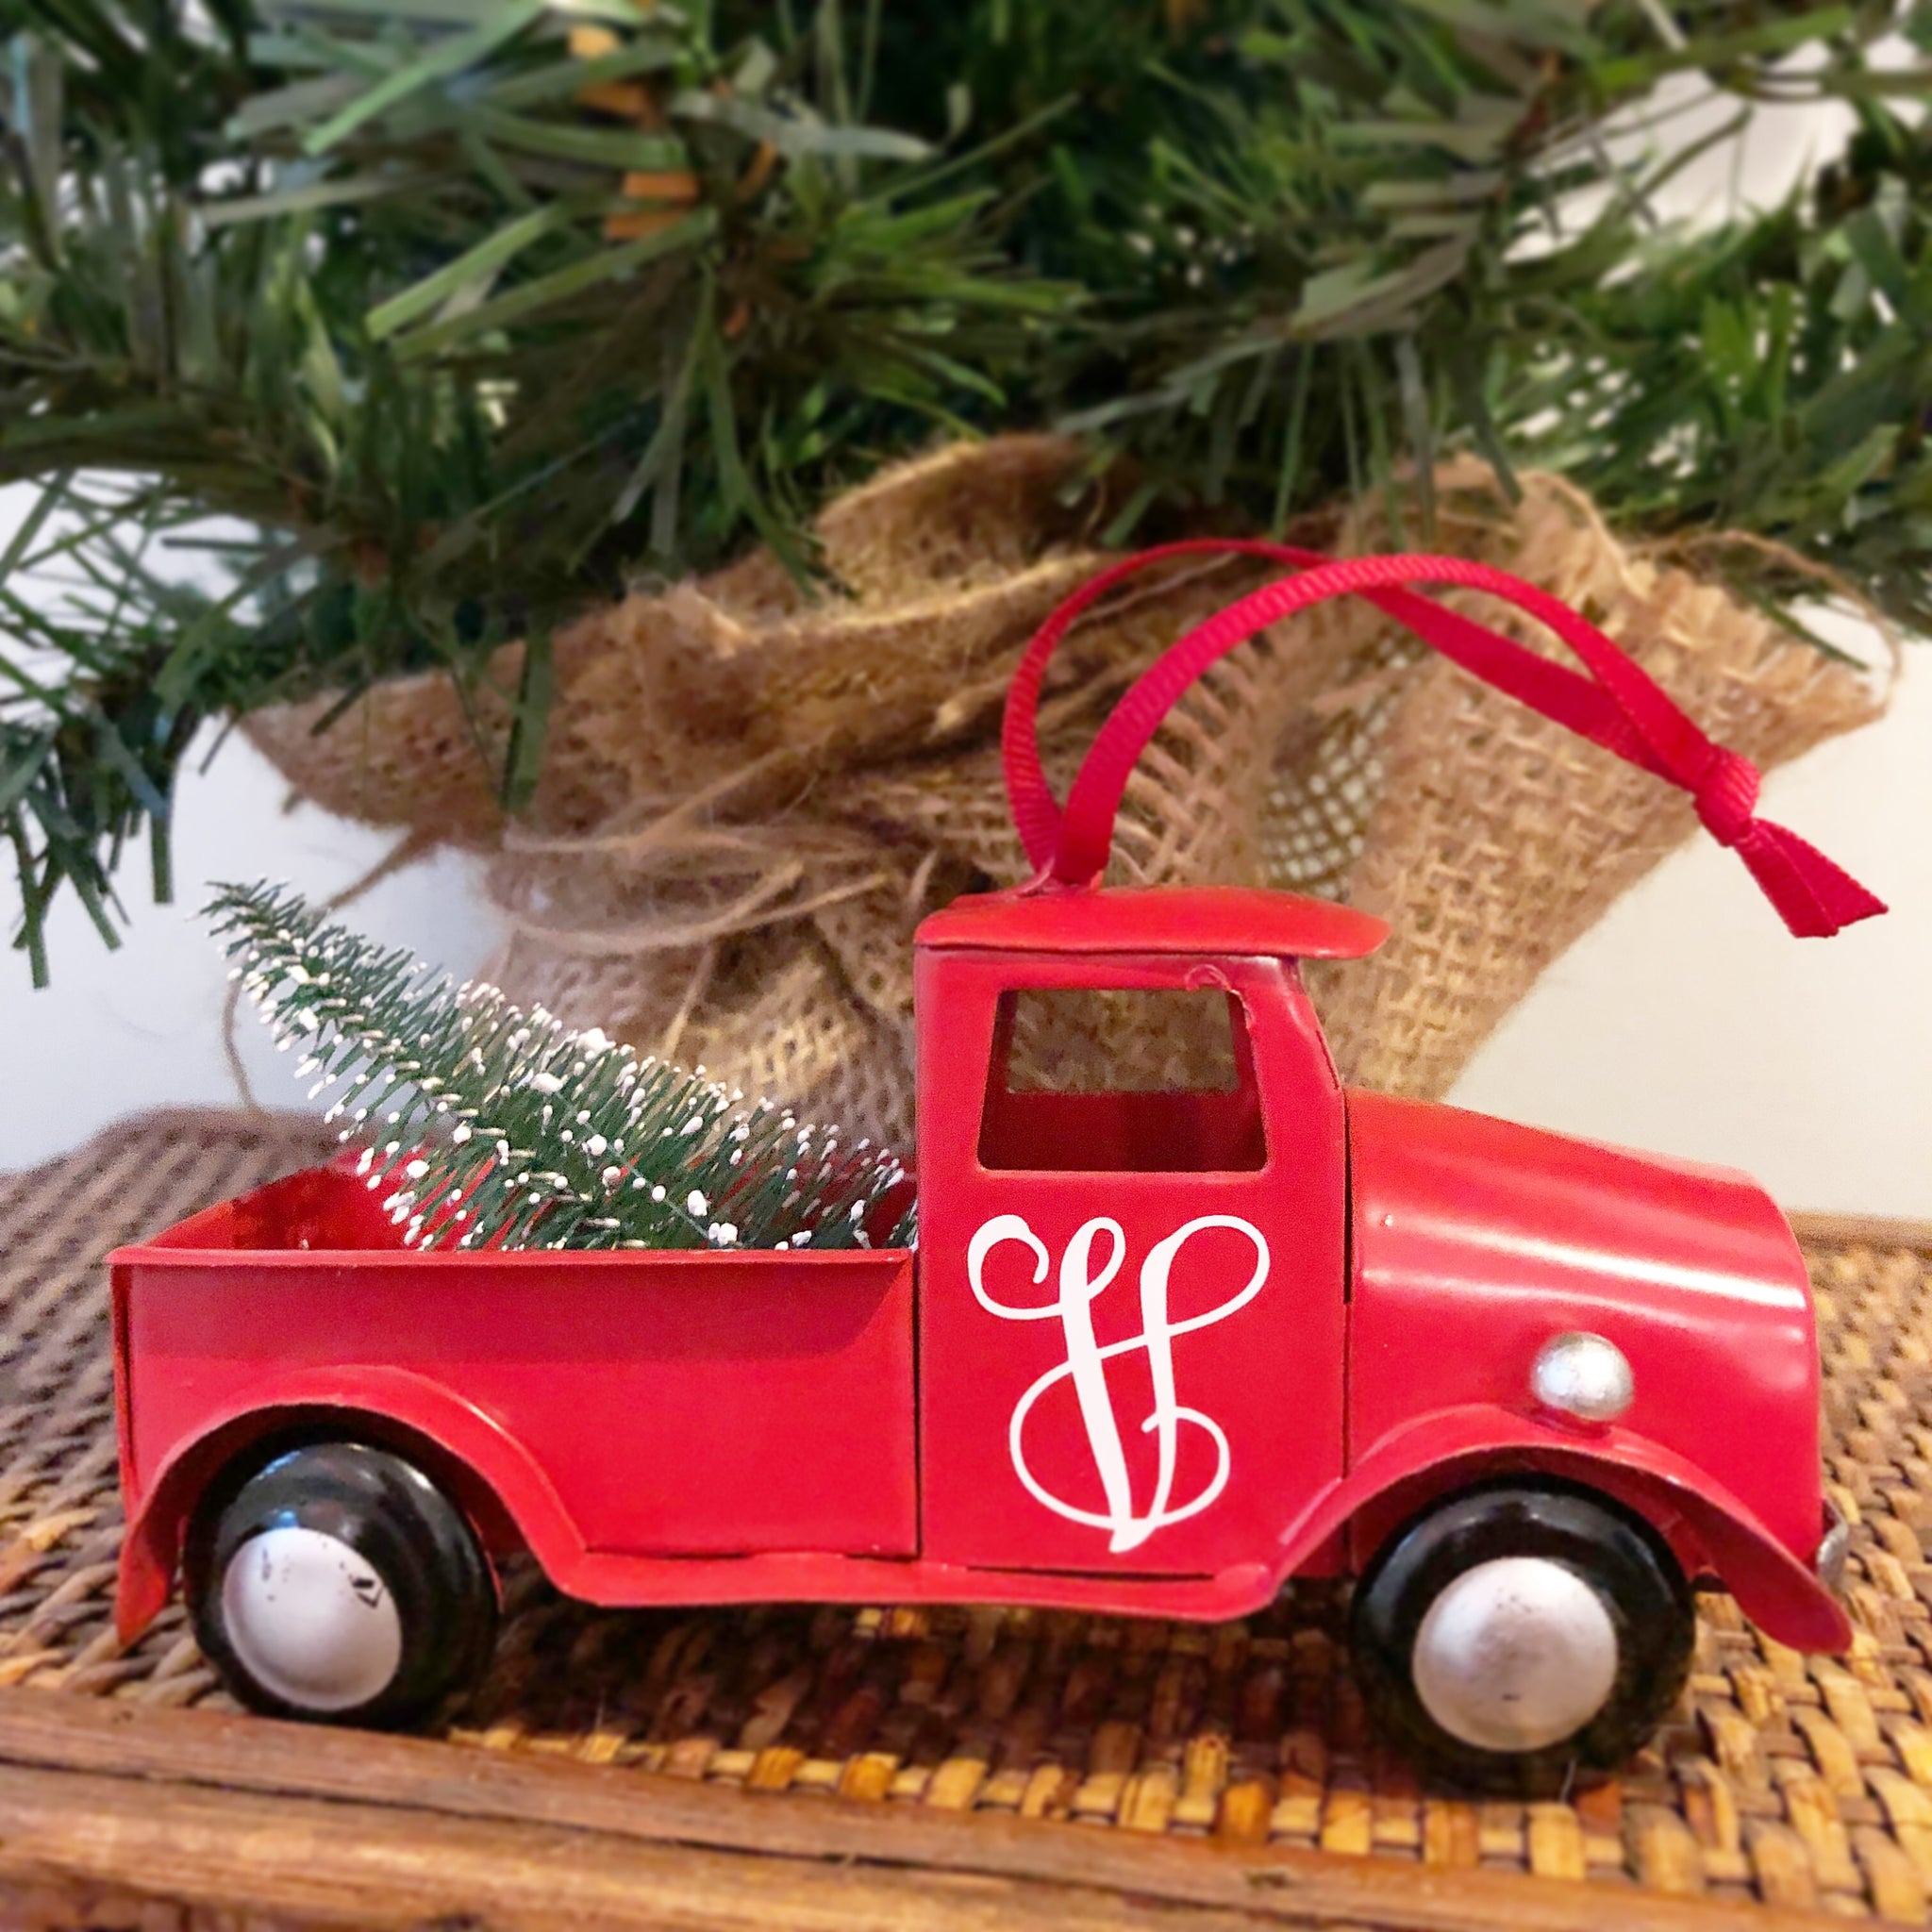 Personalized Vintage Truck Ornament